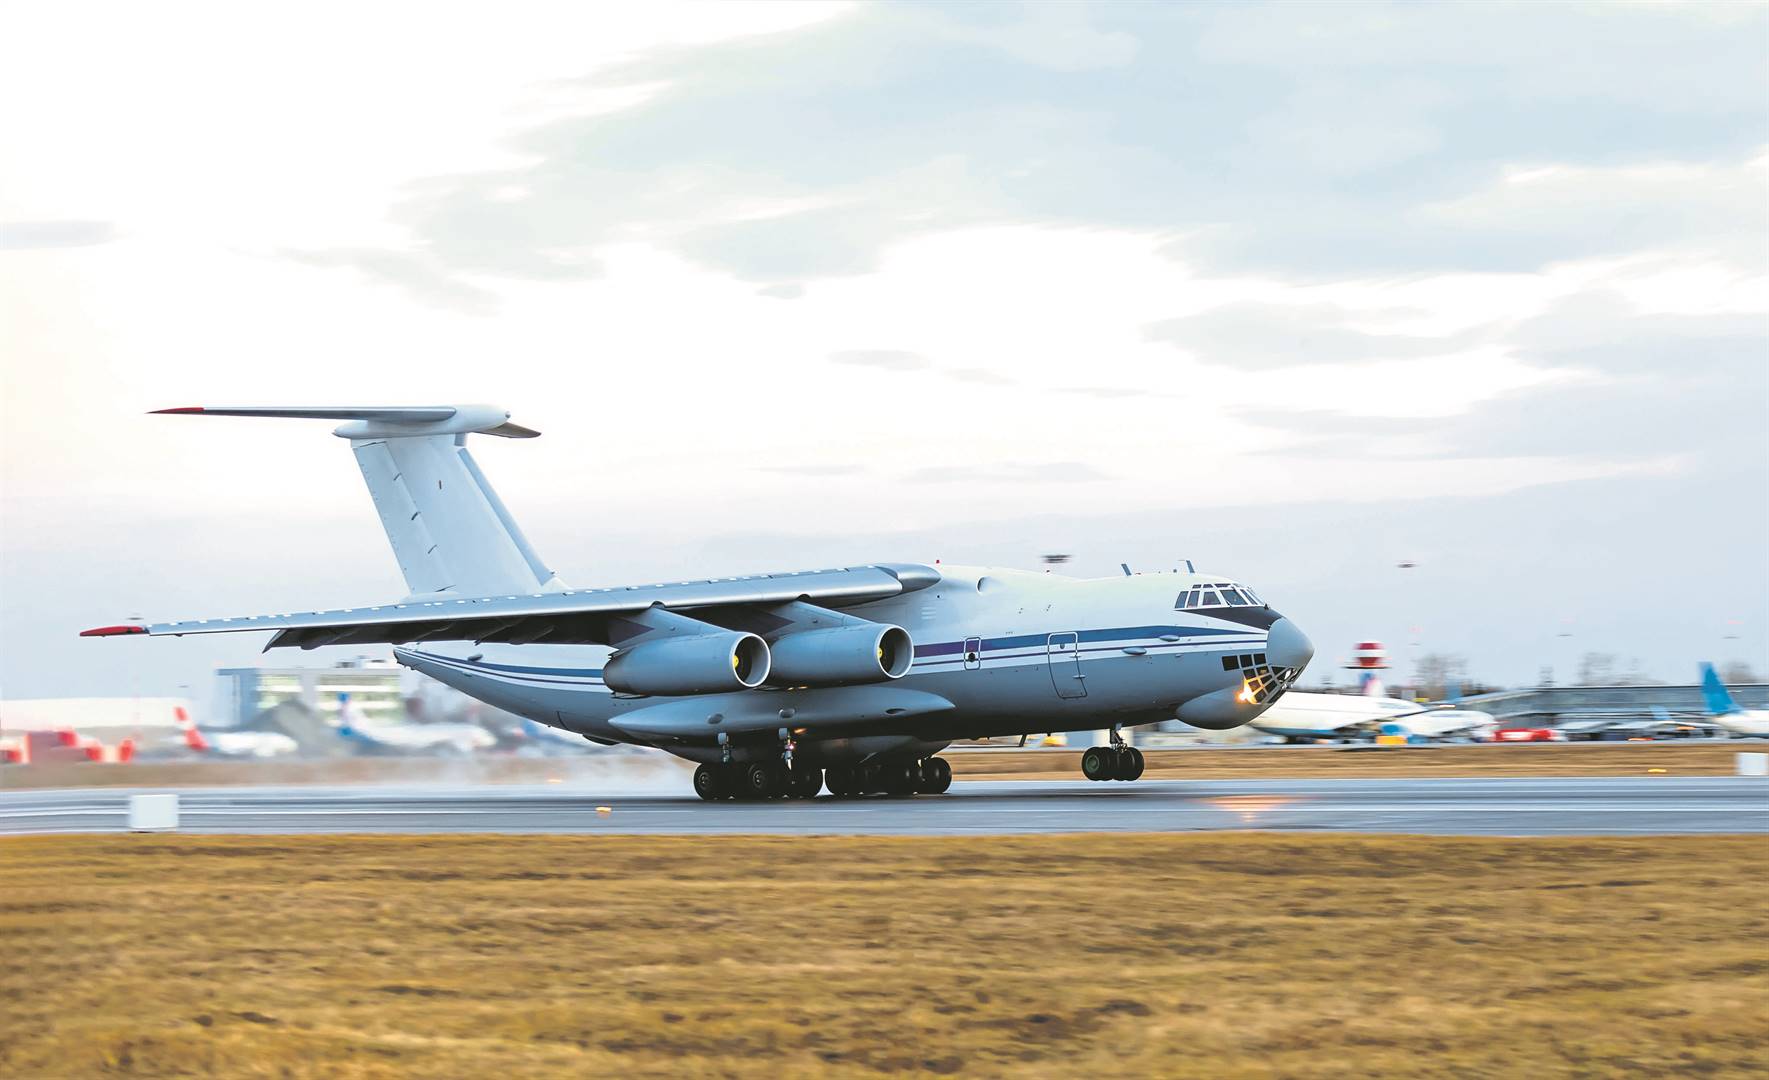 News24 | Russian cargo planes in SA to ferry military equipment to DRC